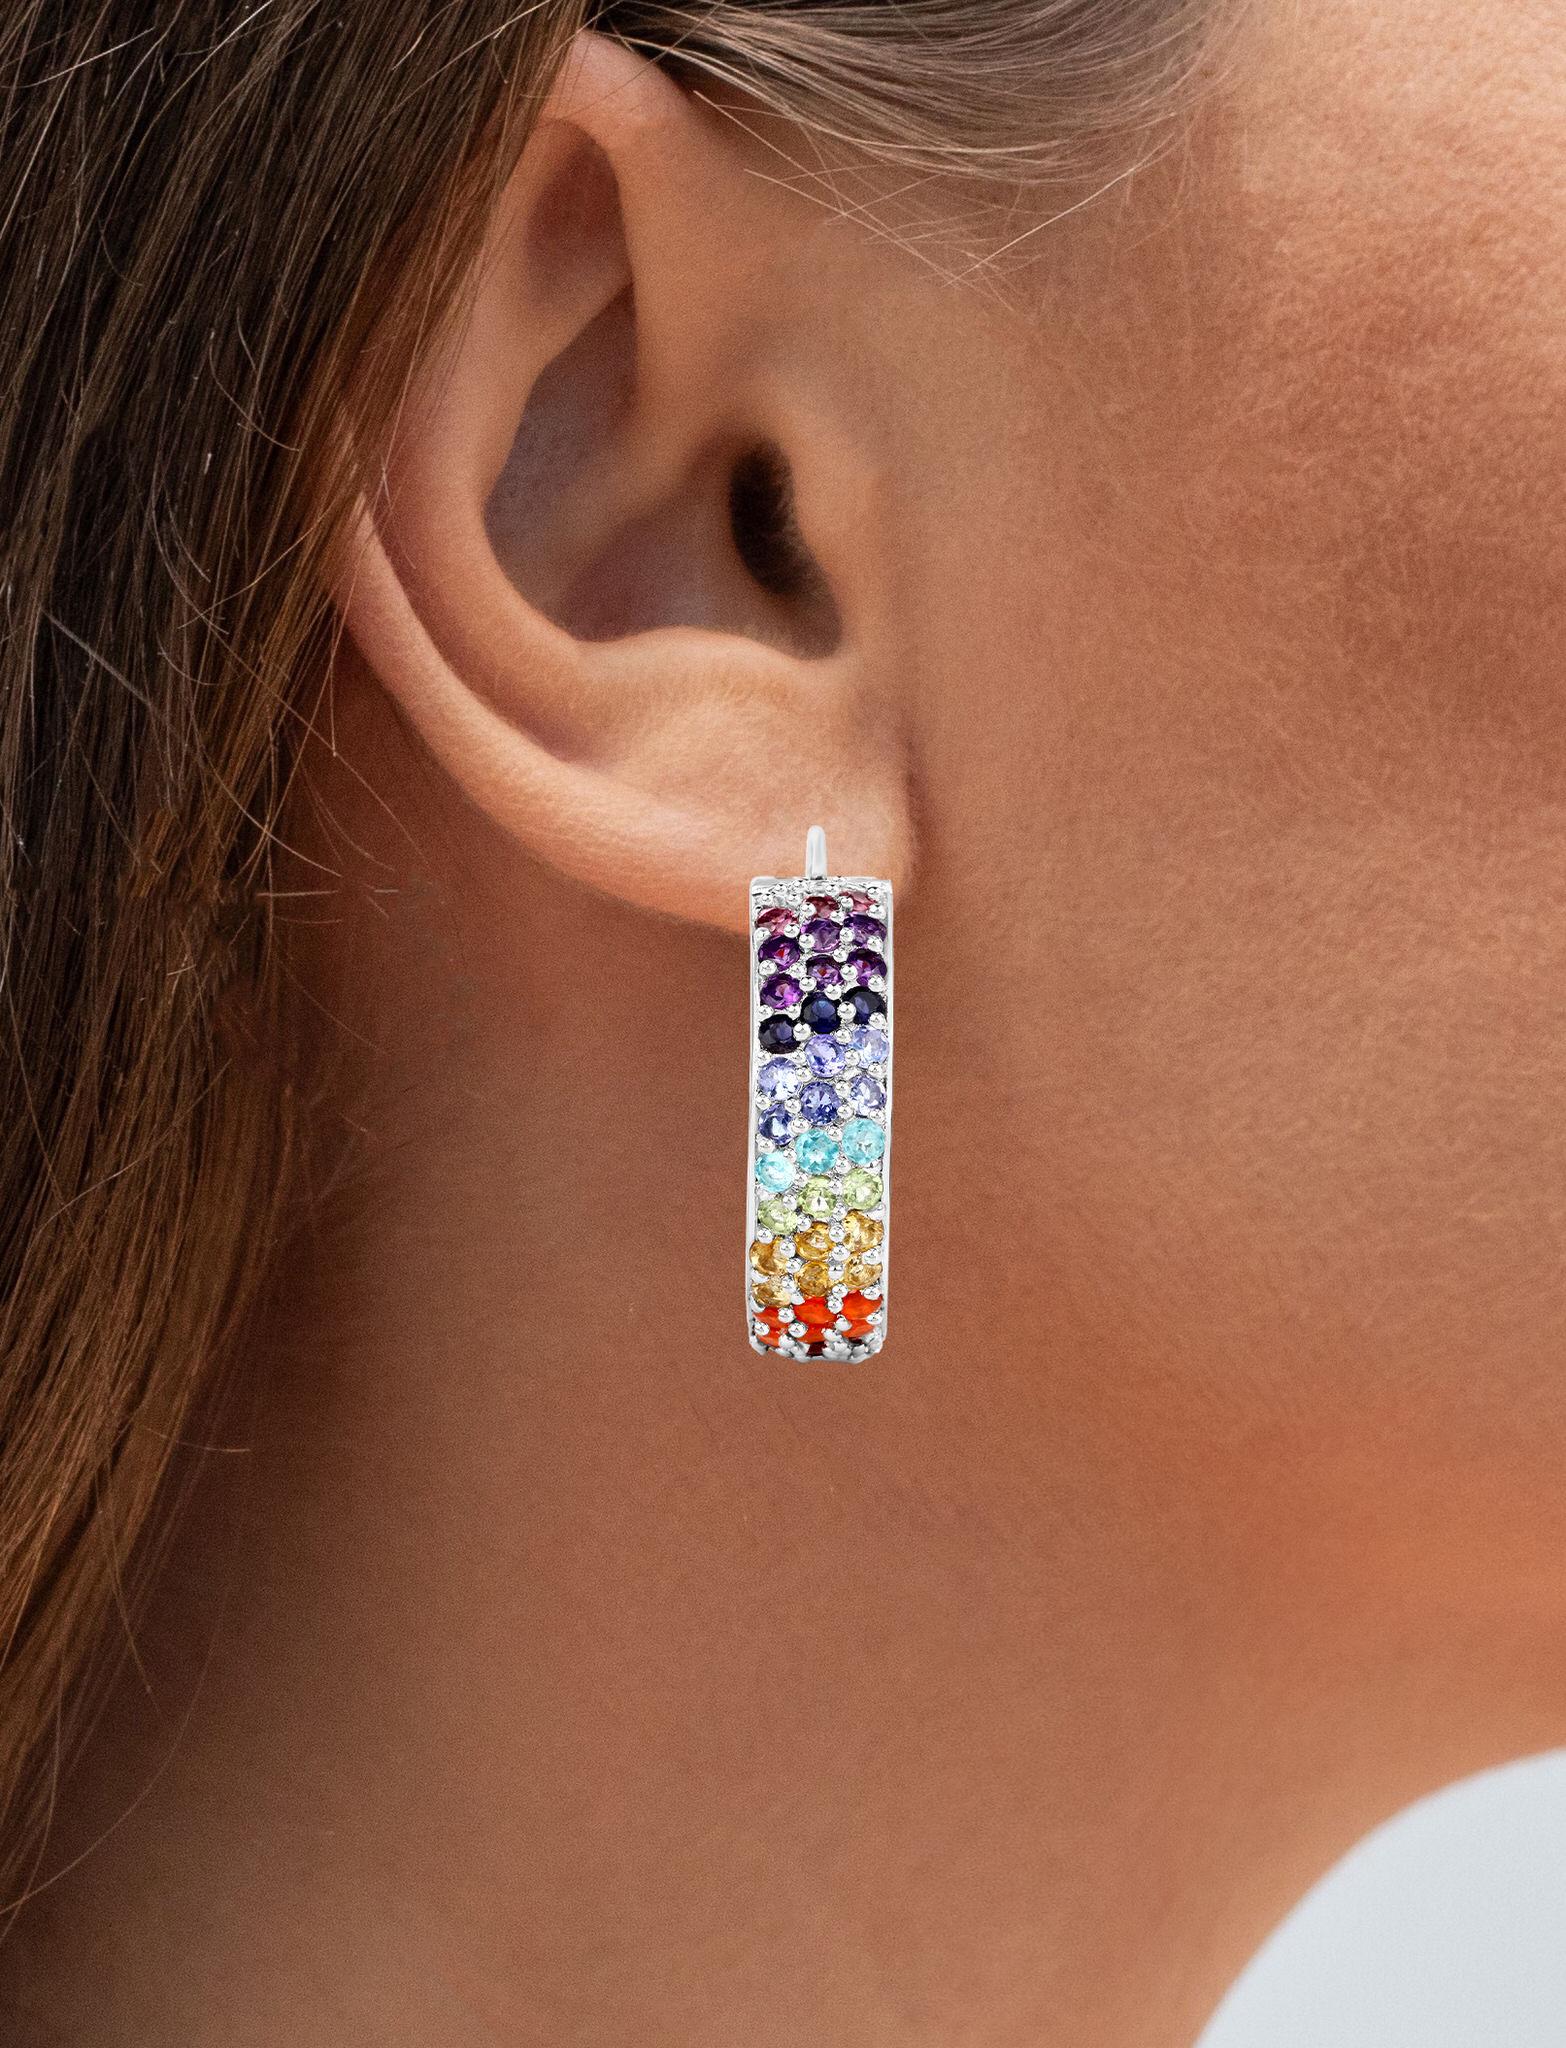 Contemporary Multicolored Gemstones Cluster Earrings 8.8 Carats 18K White Gold Plated Silver For Sale